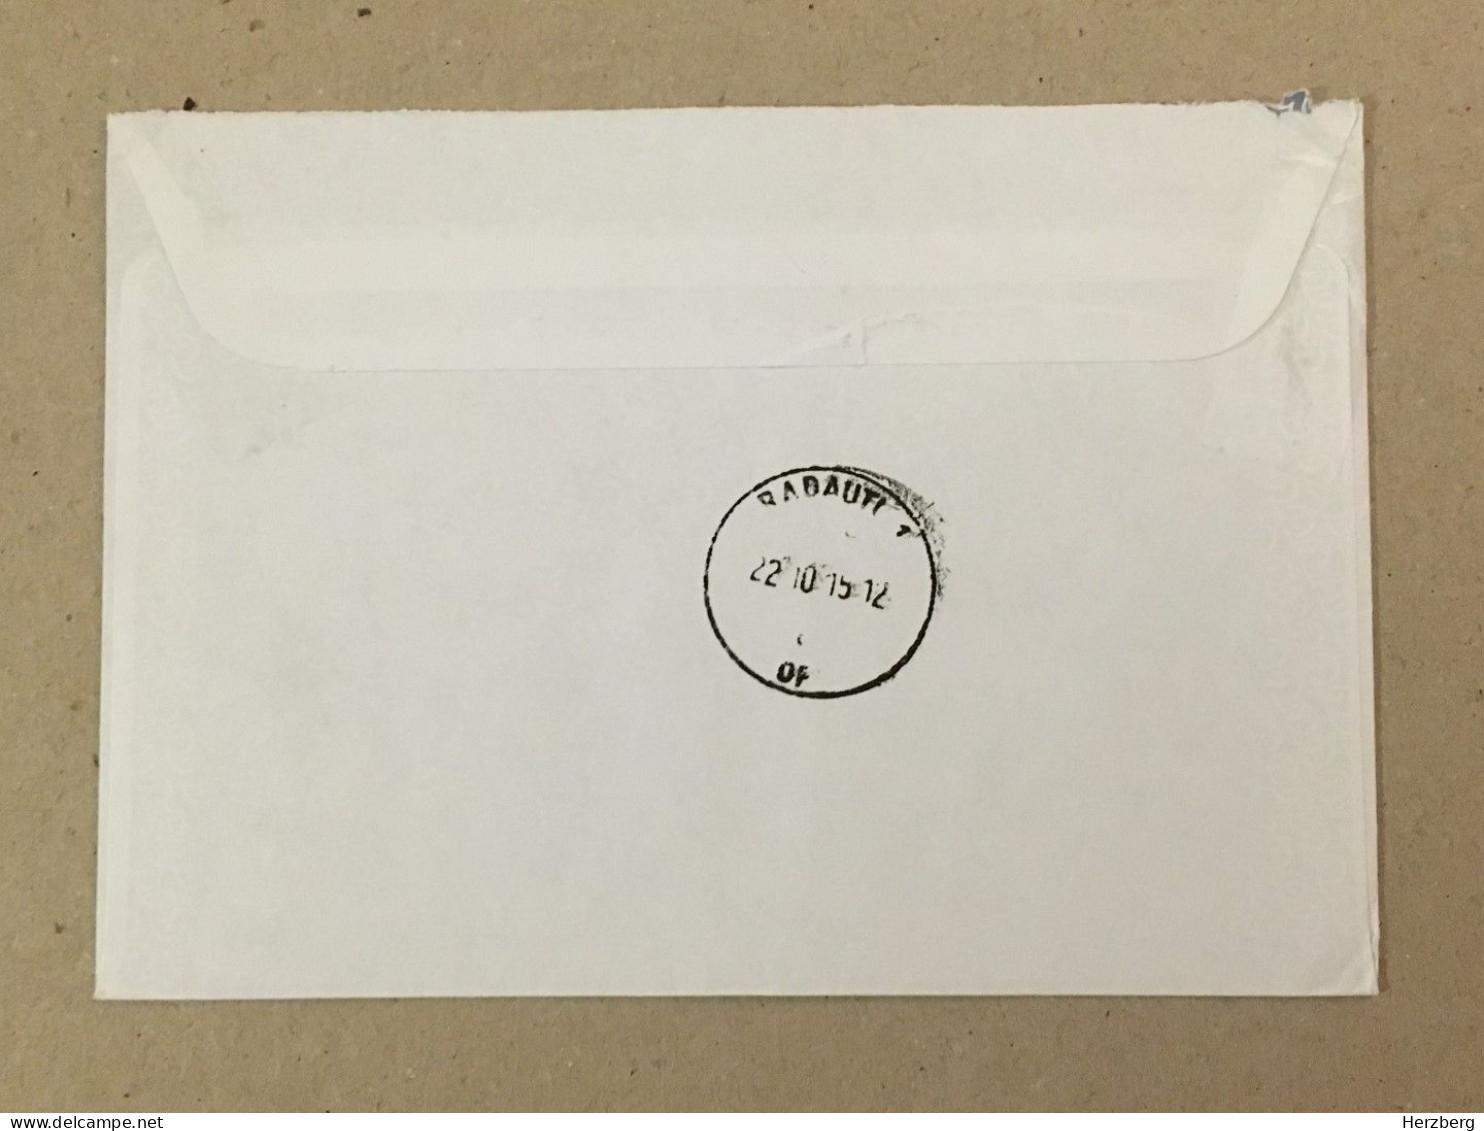 Hungary Magyarorszag Used Letter Stamp Circulated Cover Postal Label Printed Sticker Stamp 2015 - Cartas & Documentos